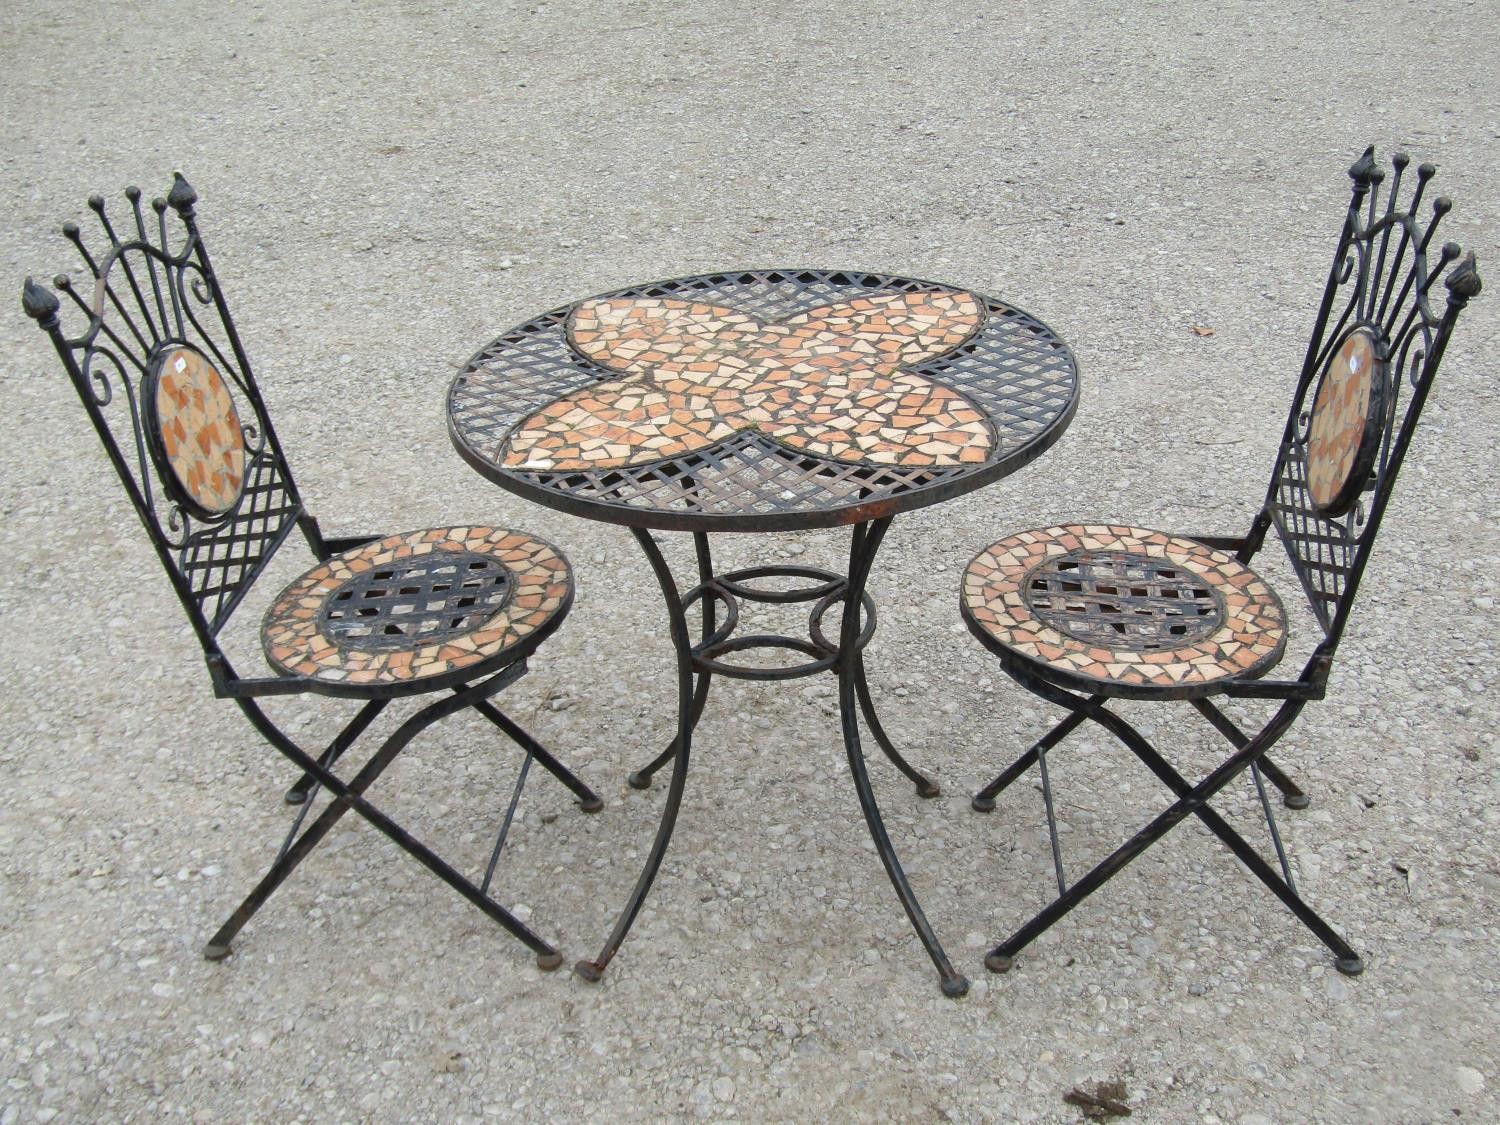 A heavy gauge three piece iron work Bistro table and two chairs with mosaic panels, lattice and